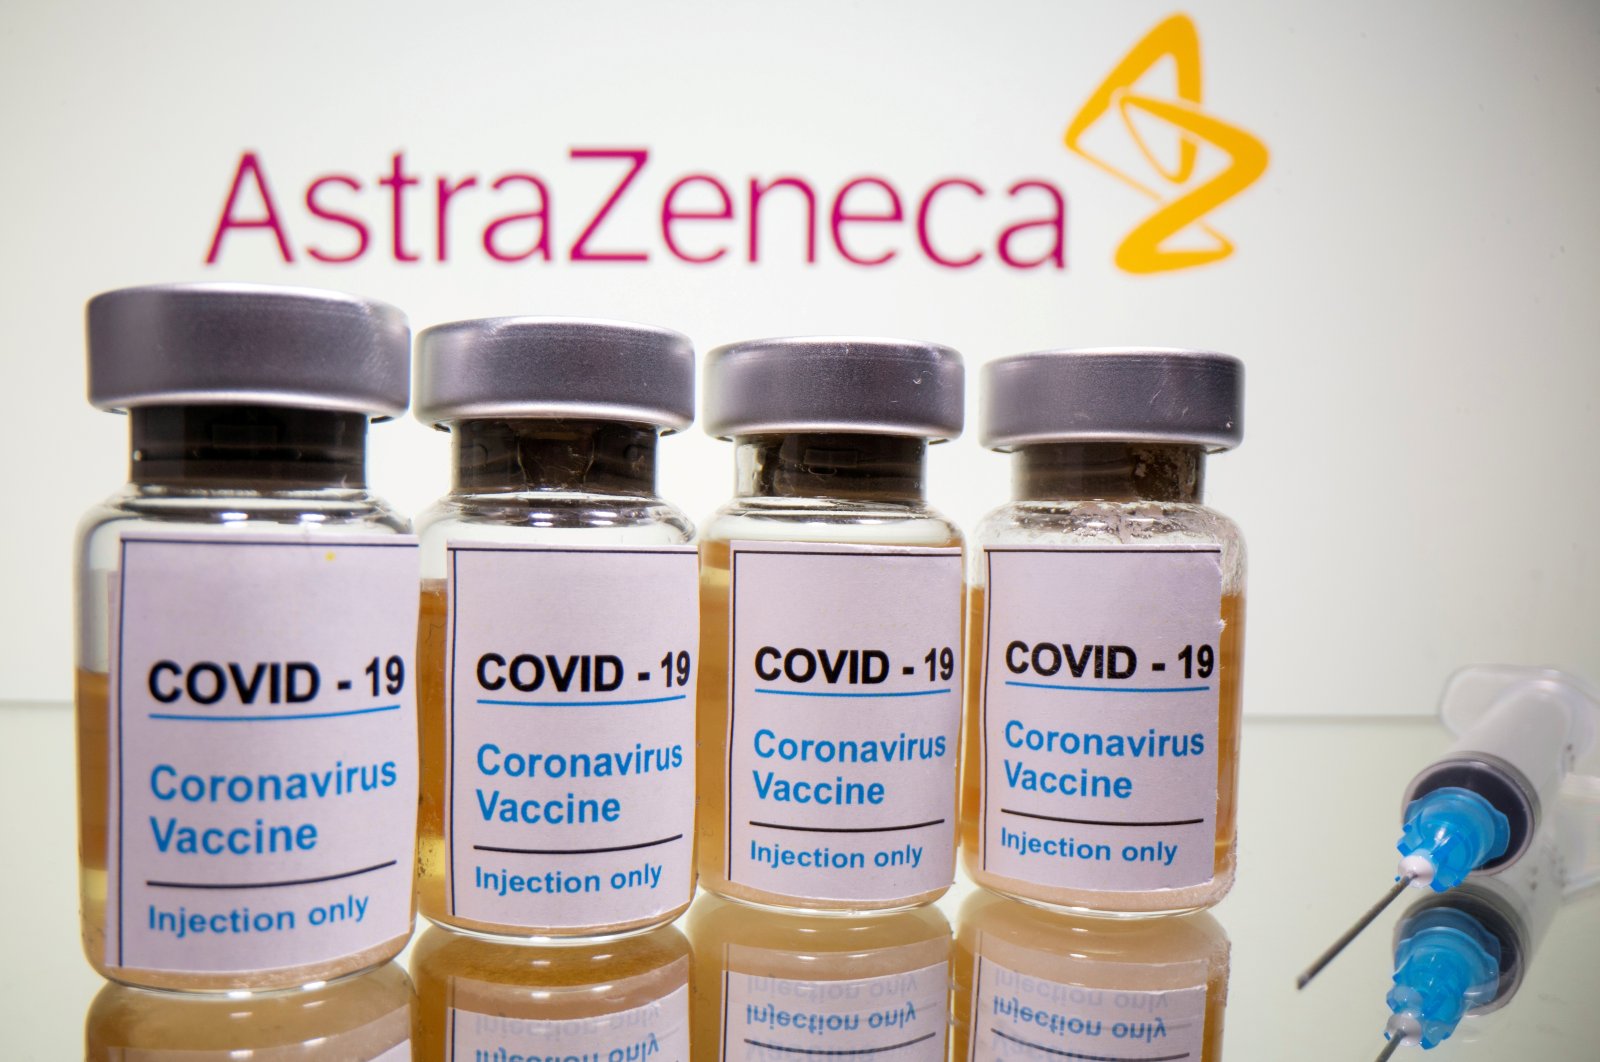 Vials with a sticker reading, "COVID-19/Coronavirus vaccine/Injection only" and a medical syringe are seen in front of a displayed AstraZeneca logo in this illustration taken Oct. 31, 2020. (Reuters Photo)